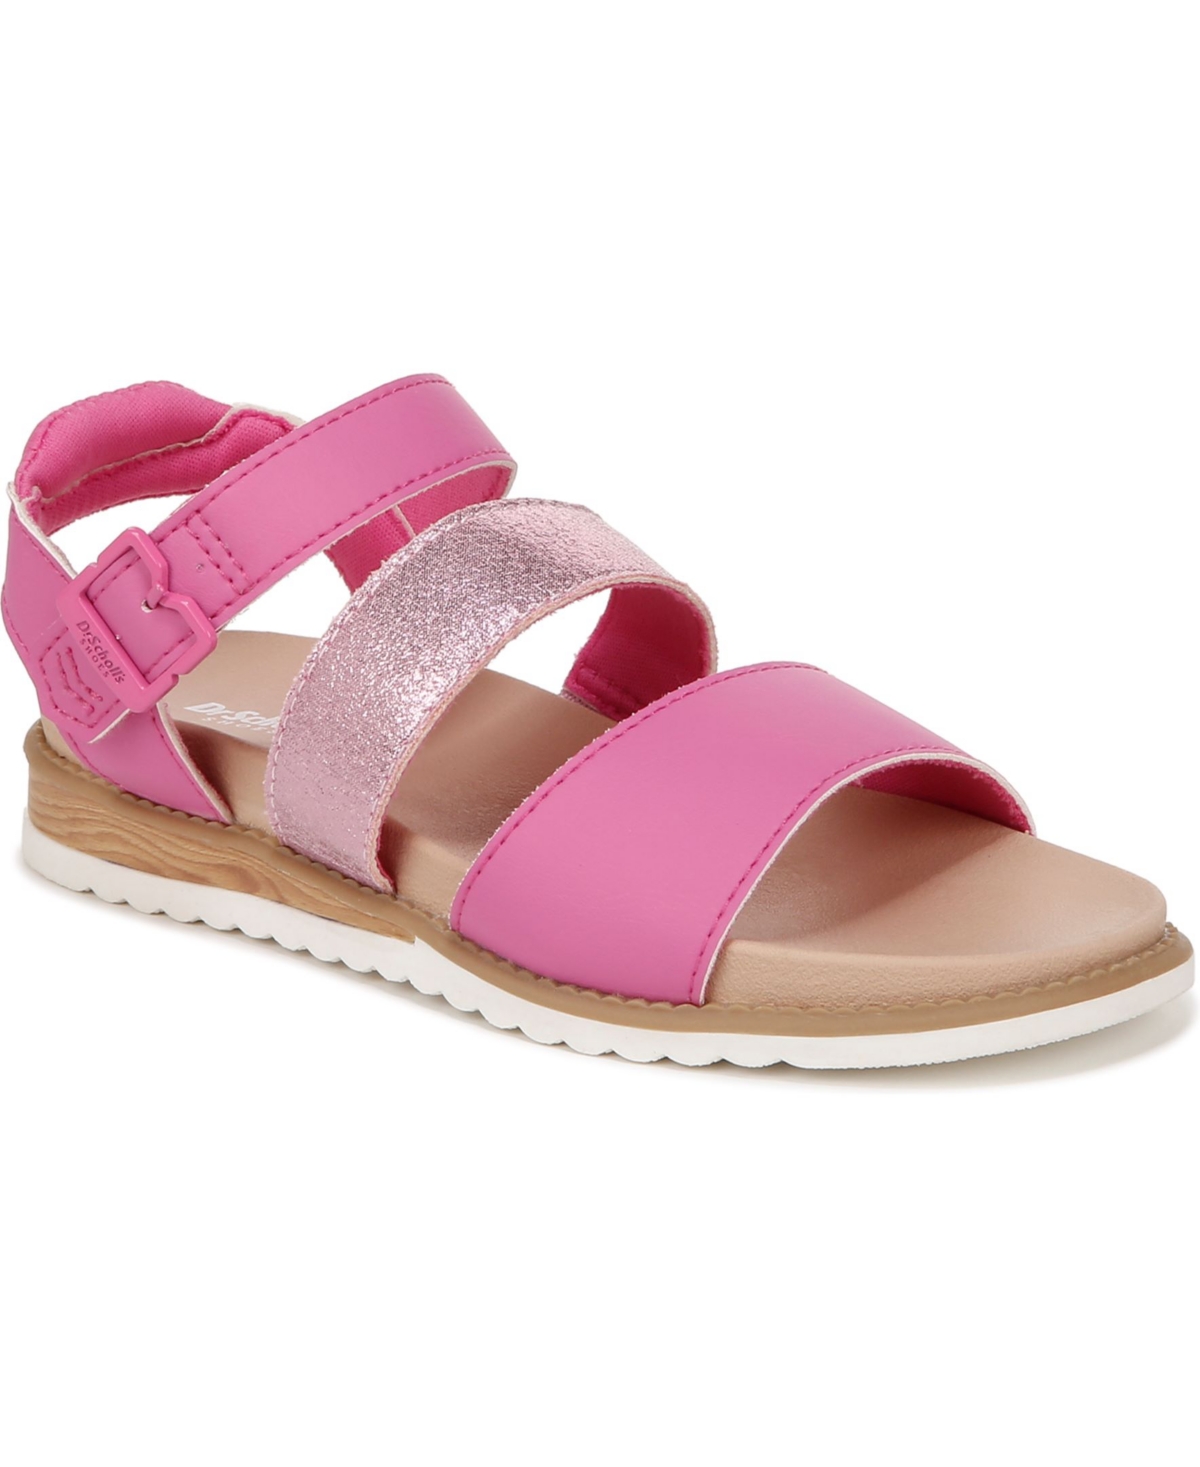 Dr. Scholl's Islandglow Kids Ankle Straps In Hot Pink